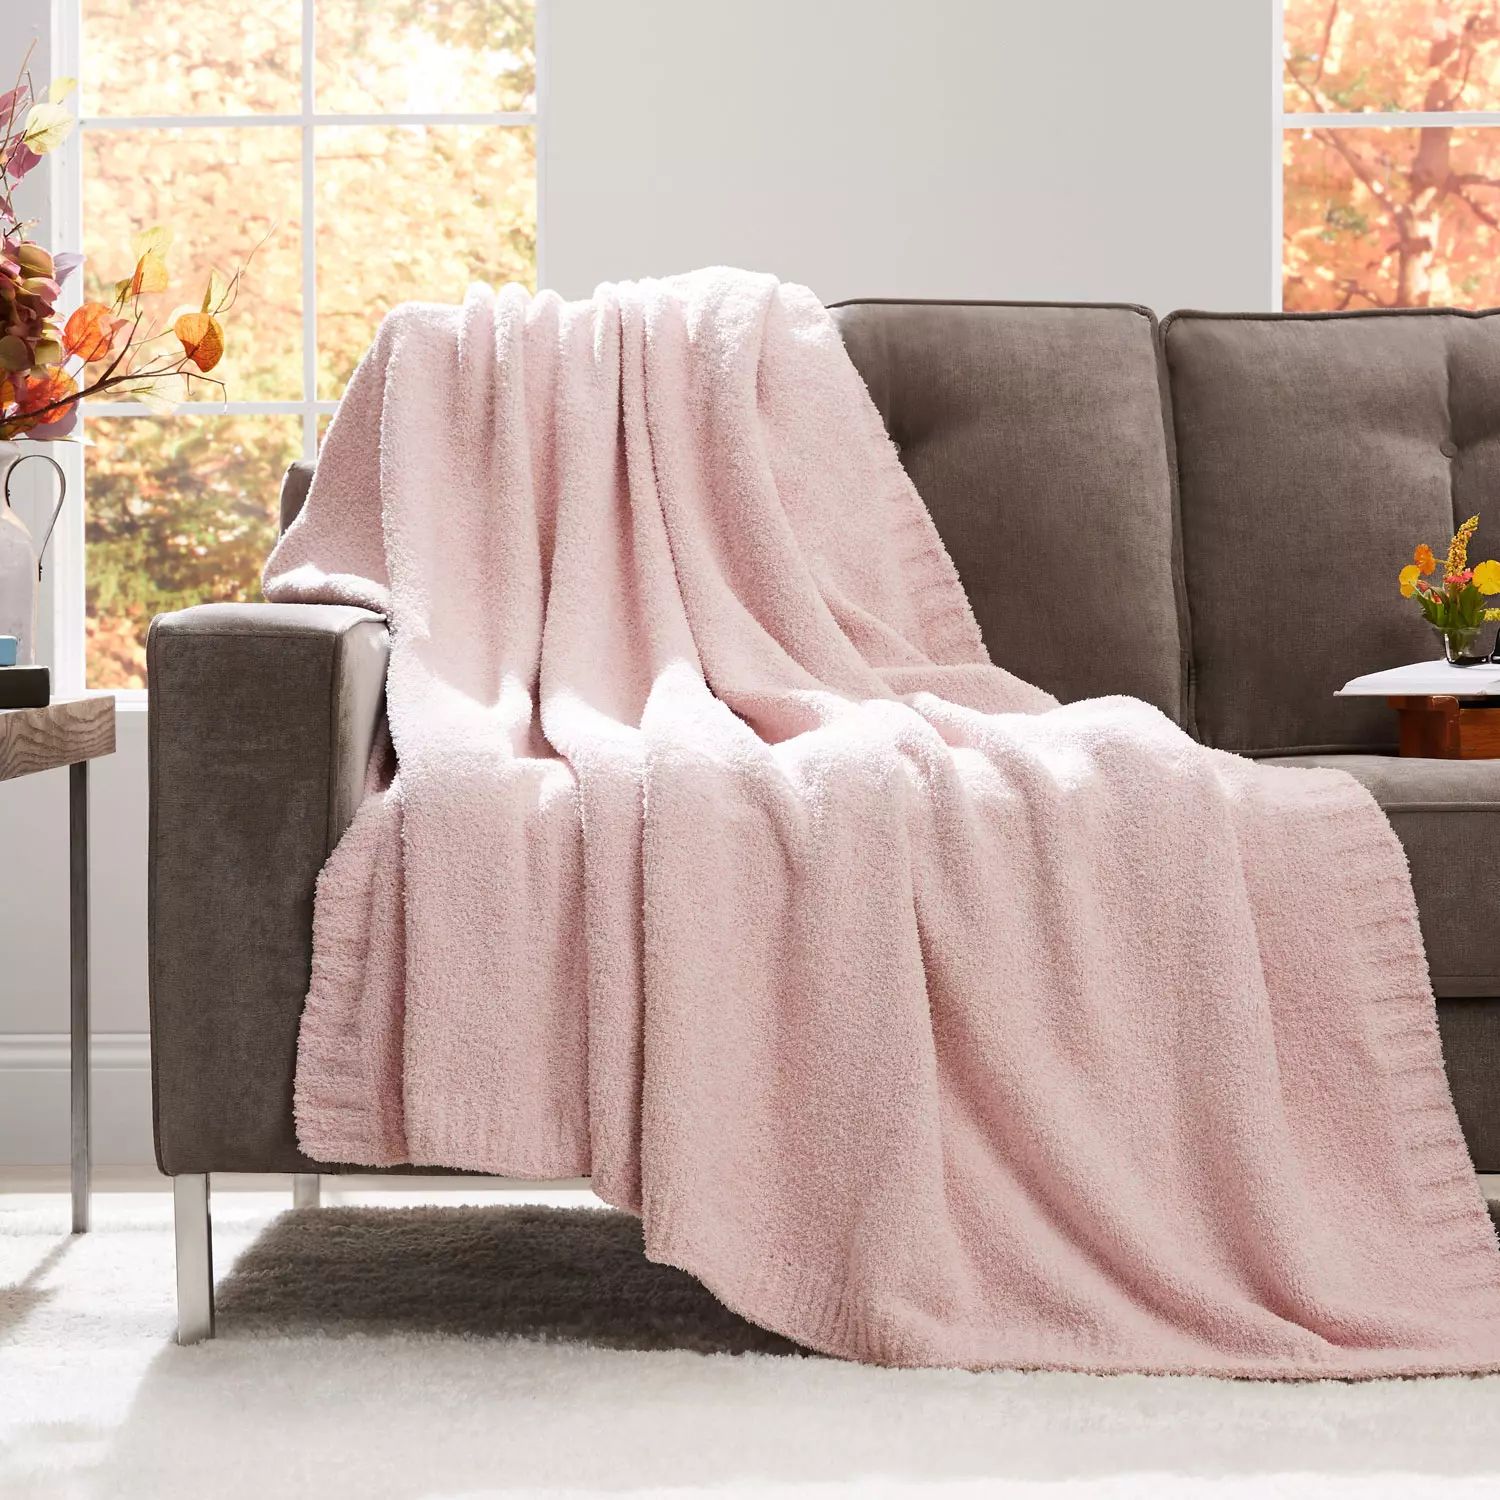 Member’s Mark Luxury Premier Collection Cozy Knit Heathered Throw (Assorted Colors) | Sam's Club